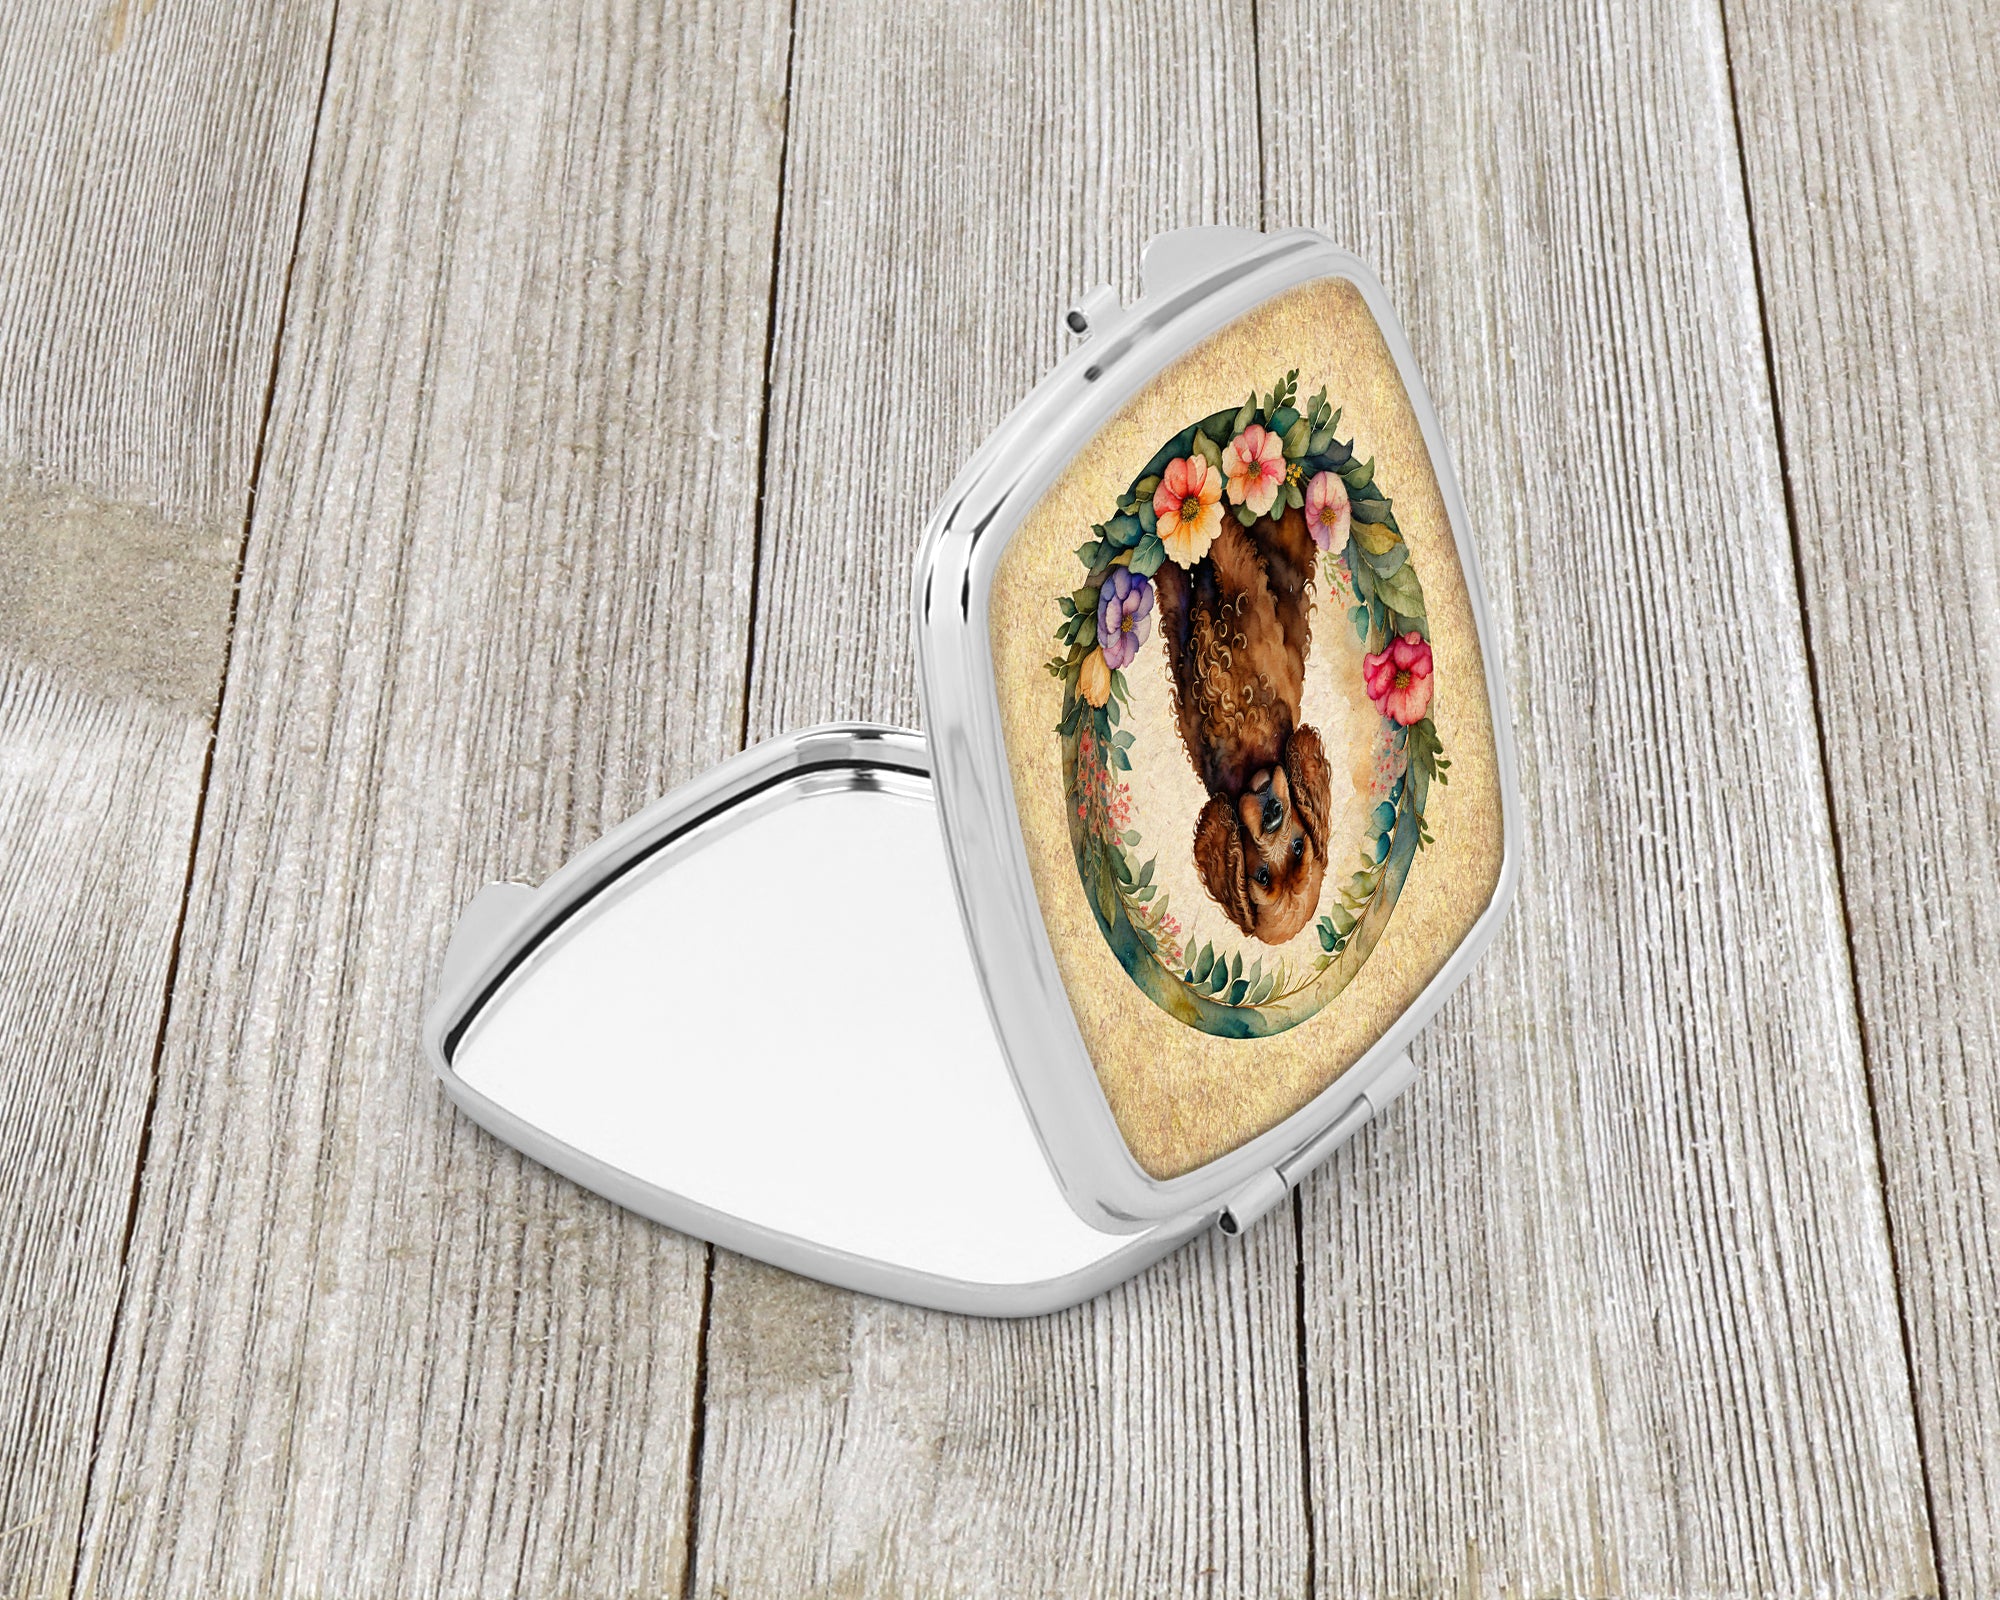 Buy this Irish Water Spaniel and Flowers Compact Mirror